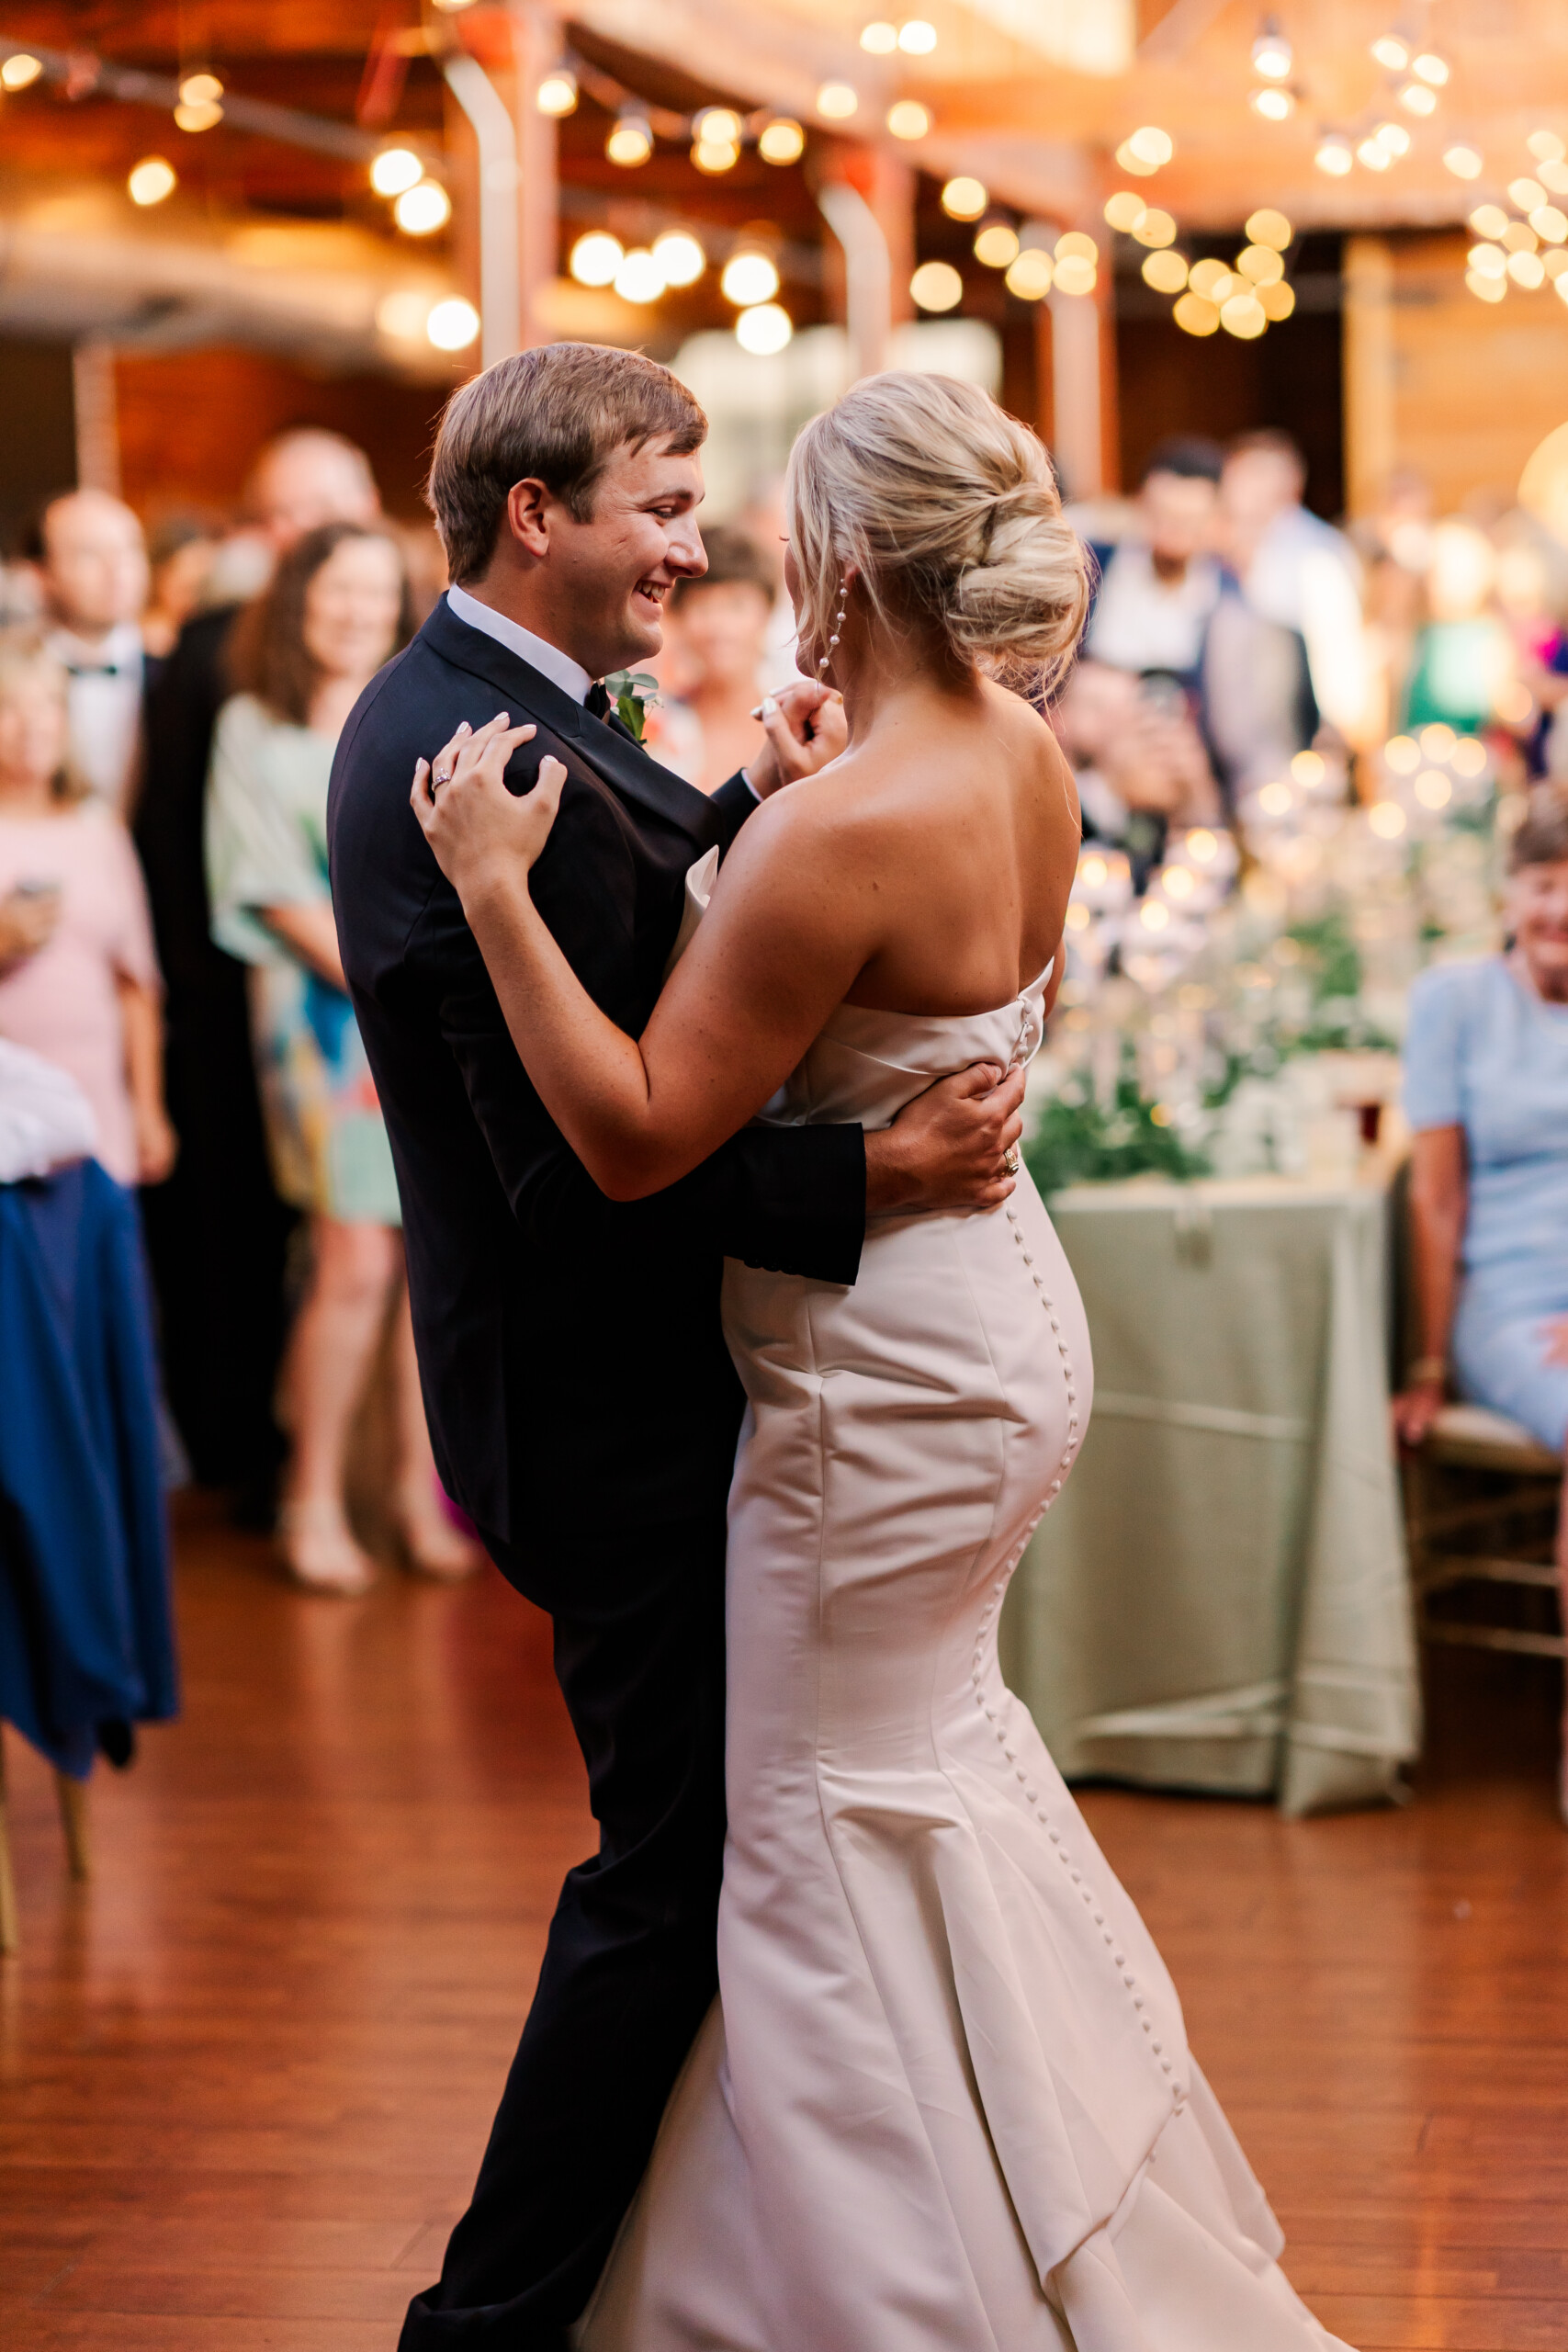 The Turnbull First Dance